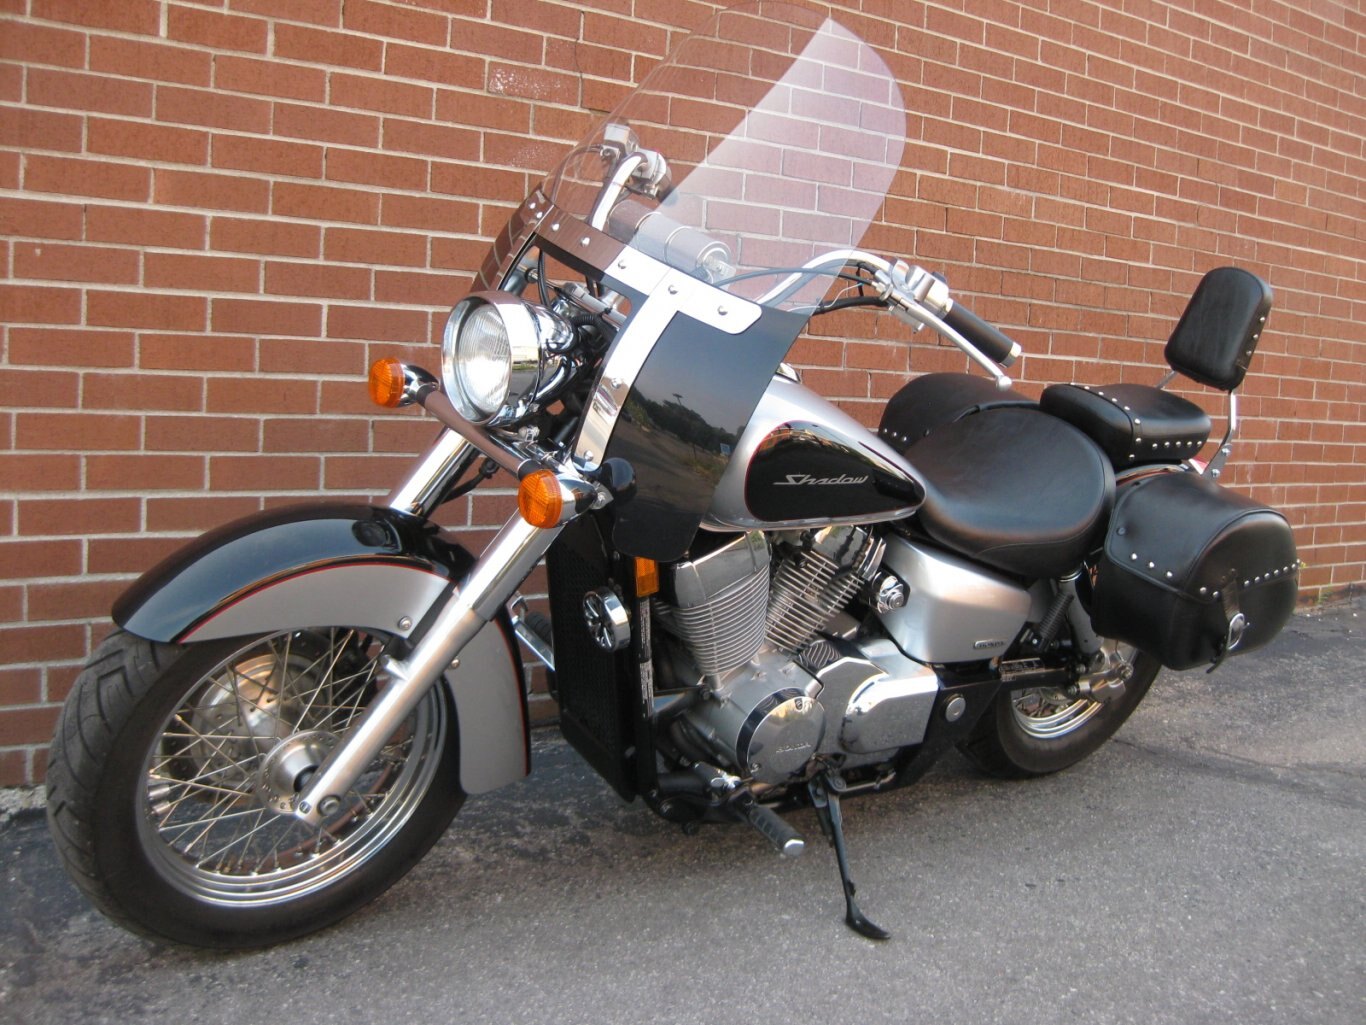 2008 Honda VT750C Shadow Aero THIS RETRO CRUISER IS SOLD & CONGRATULATIONS TO SIR SEAN A FELLOW ROAD WARRIOR !! WELCOME TO THE COMMUNITY OF MOTORCYCLING ON THIS TOURING EQUIPPED CRUISER & A TWO WHEEL FREEDOM MACHINE WITH THANKS FROM GARY & TEAM CYCLE WORLD!!!!